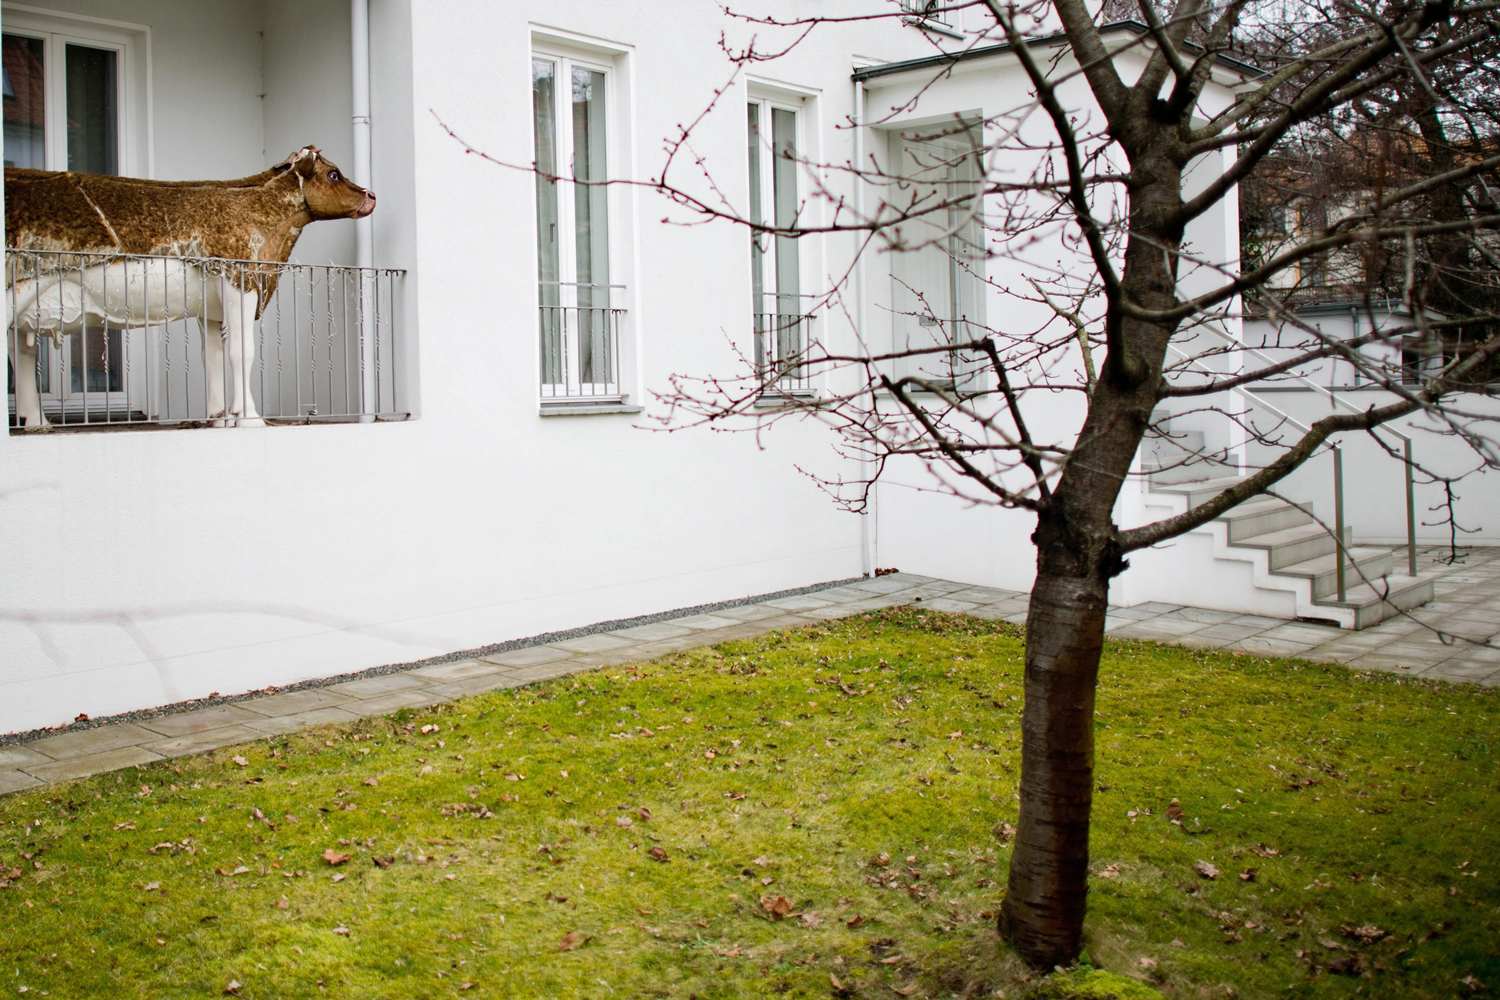 A statue of a cow stands on a balcony of a private home in Hanover, Germany, Feb. 18 2014. The piece of art was put on the balcony on purpose, because the inhabitants thought it would encumber the mowing of the lawn.